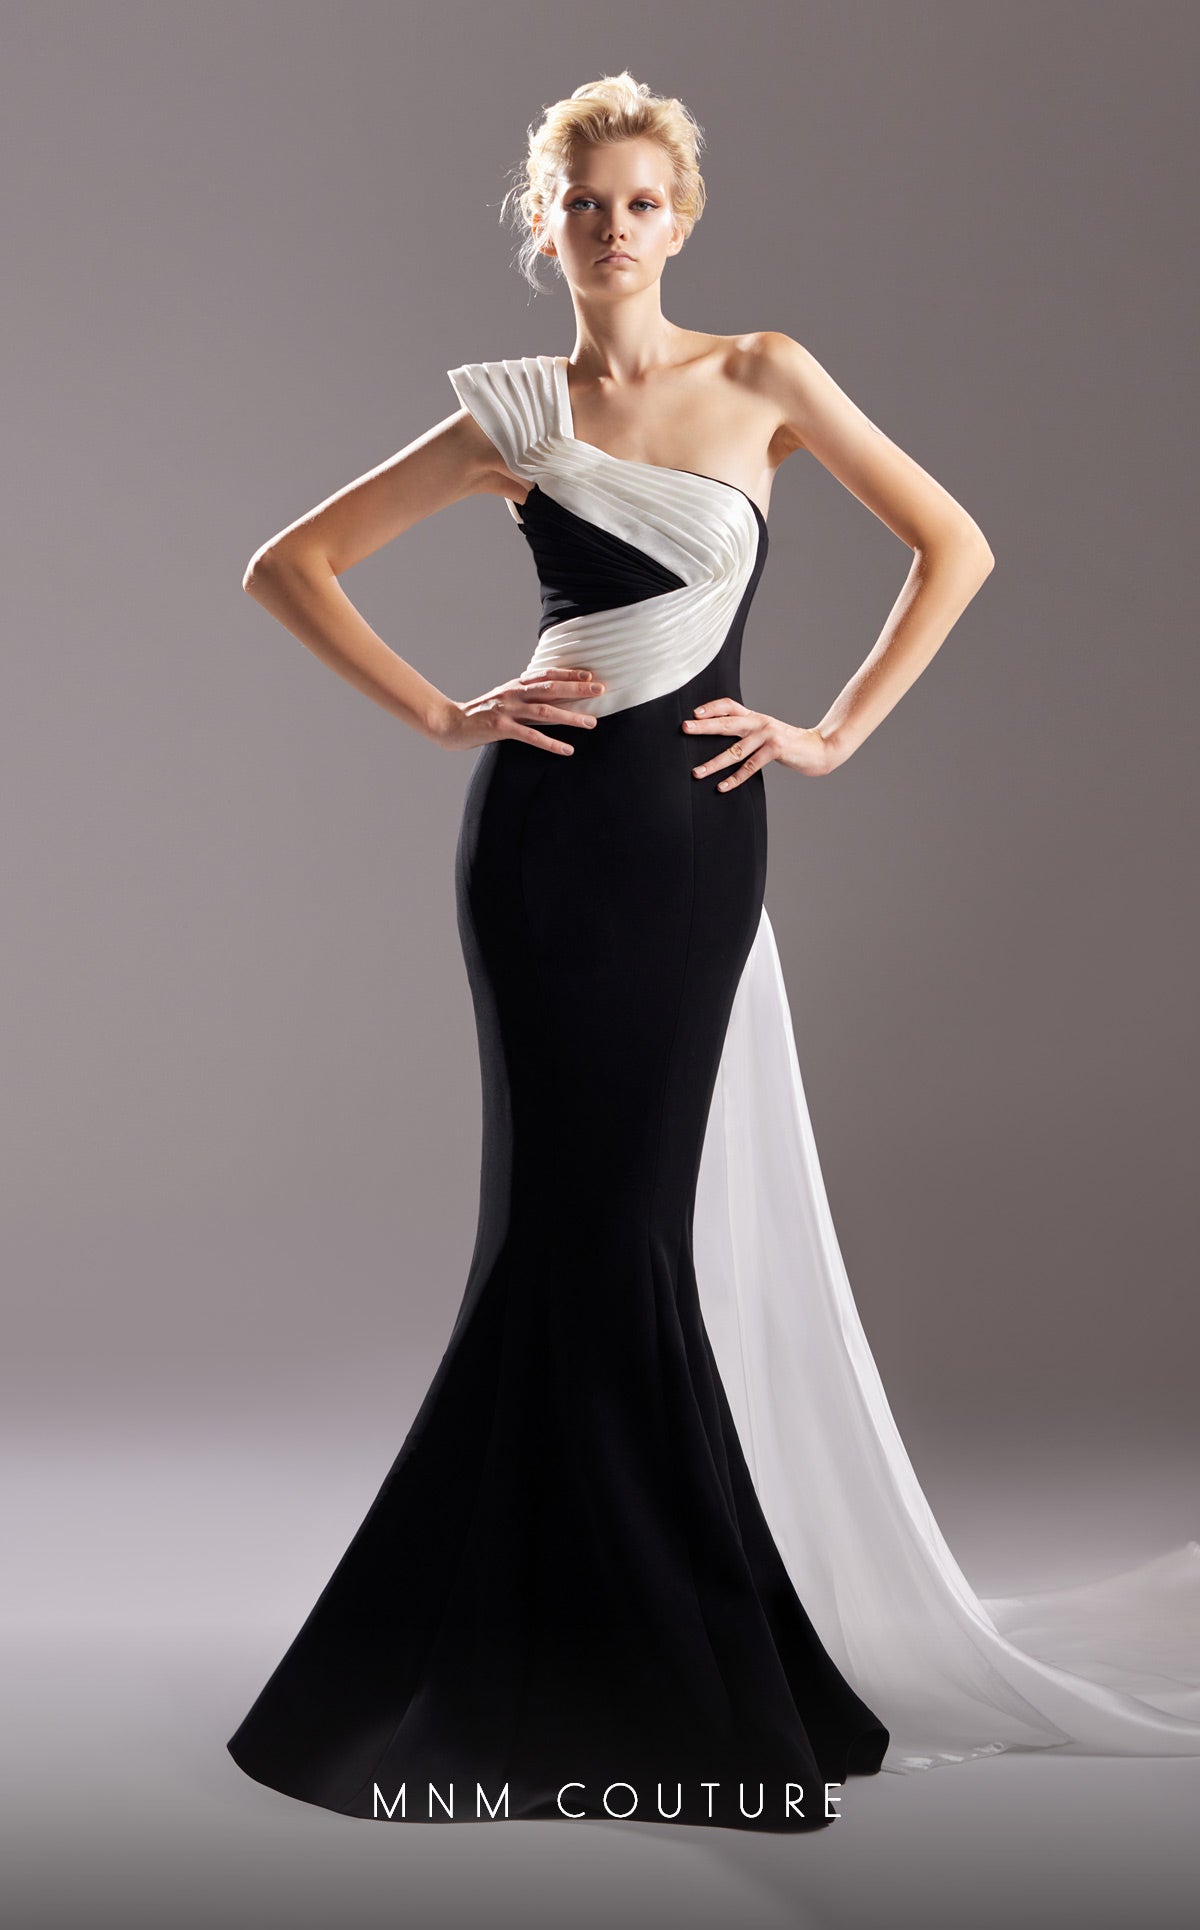 MNM Couture G1502 long one shoulder mermaid style evening gown with perfectly draped fabric details from the shoulder down to the floor.